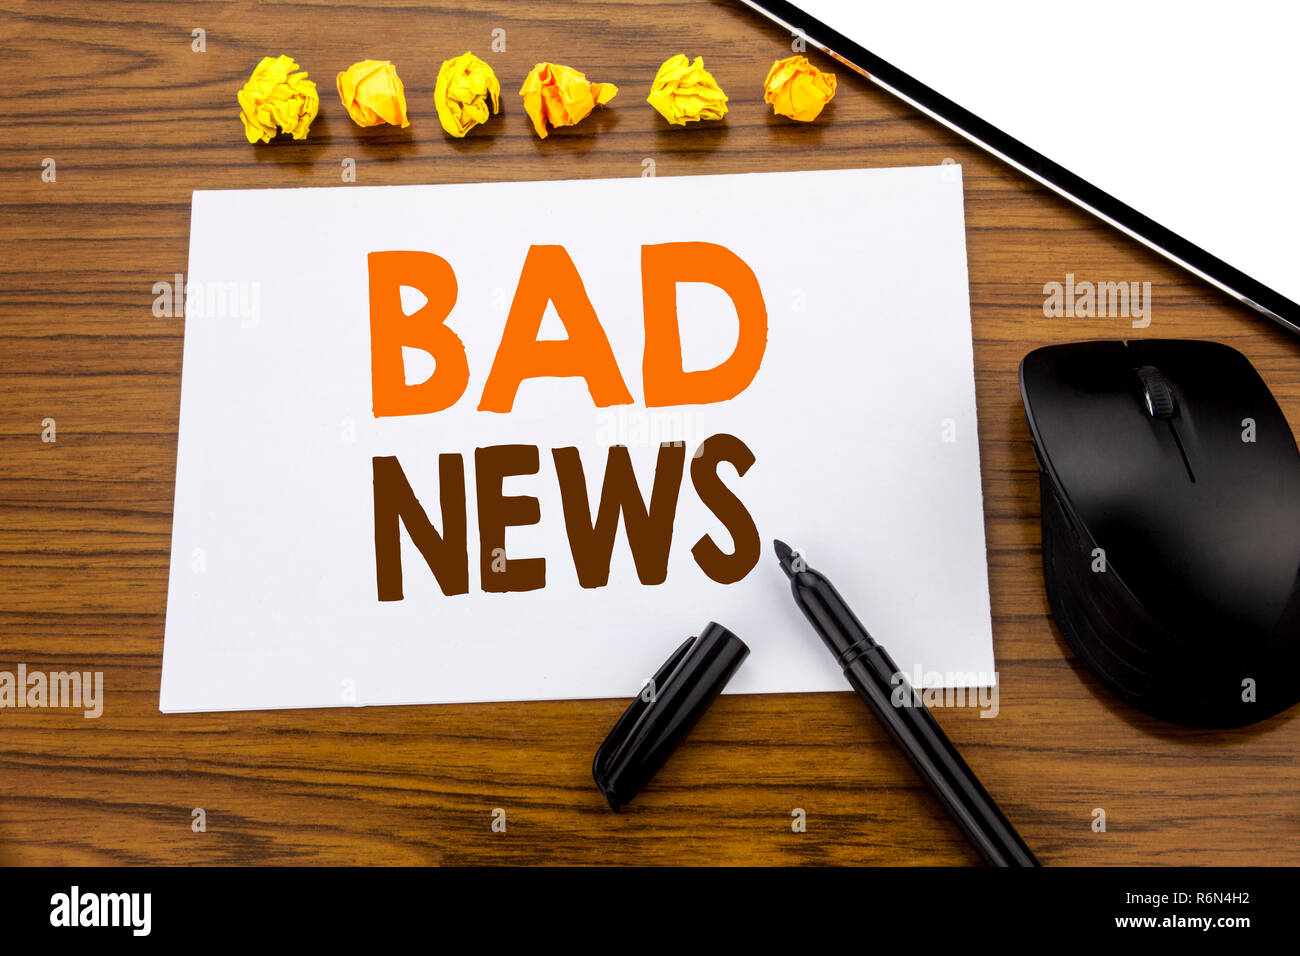 Conceptual hand writing text showing Bad News. Business concept for Failure Media Newspaper written on sticky note paper on the wooden background with marker mouse and tablet office view. Stock Photo